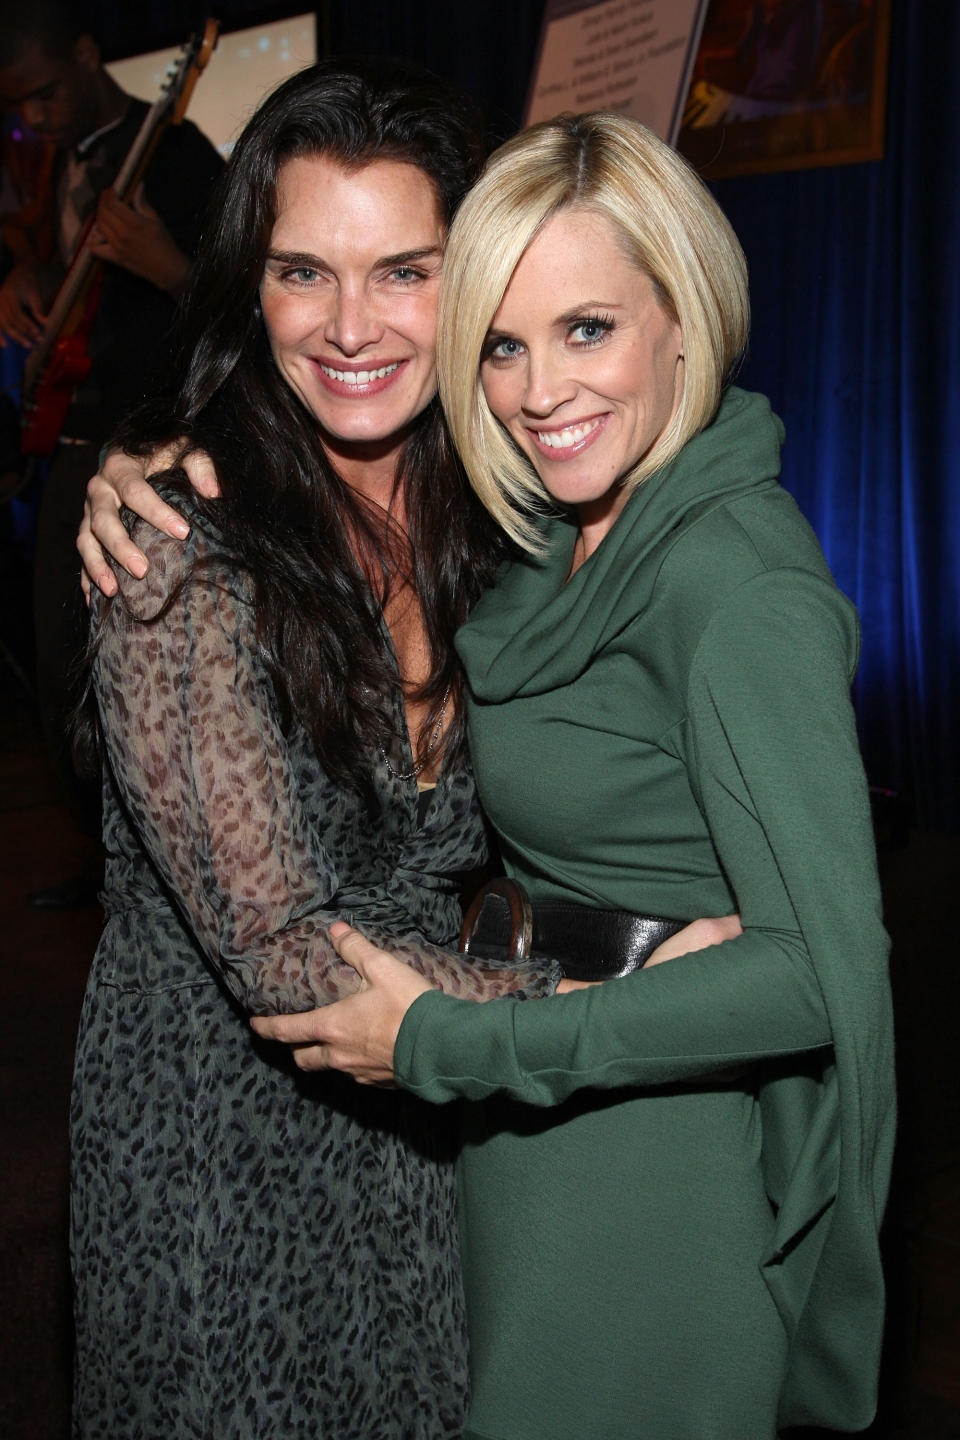 PACIFIC PALISADES, CA - OCTOBER 11:  Brooke Shields and Jenny McCarthy attend a cocktail party for the UCLA Early Childhood Partial Hospitalization Program hosted by Jenny McCarthy on October 11, 2007 in Pacific Palisades, California.  (Photo by John Shearer/WireImage) 